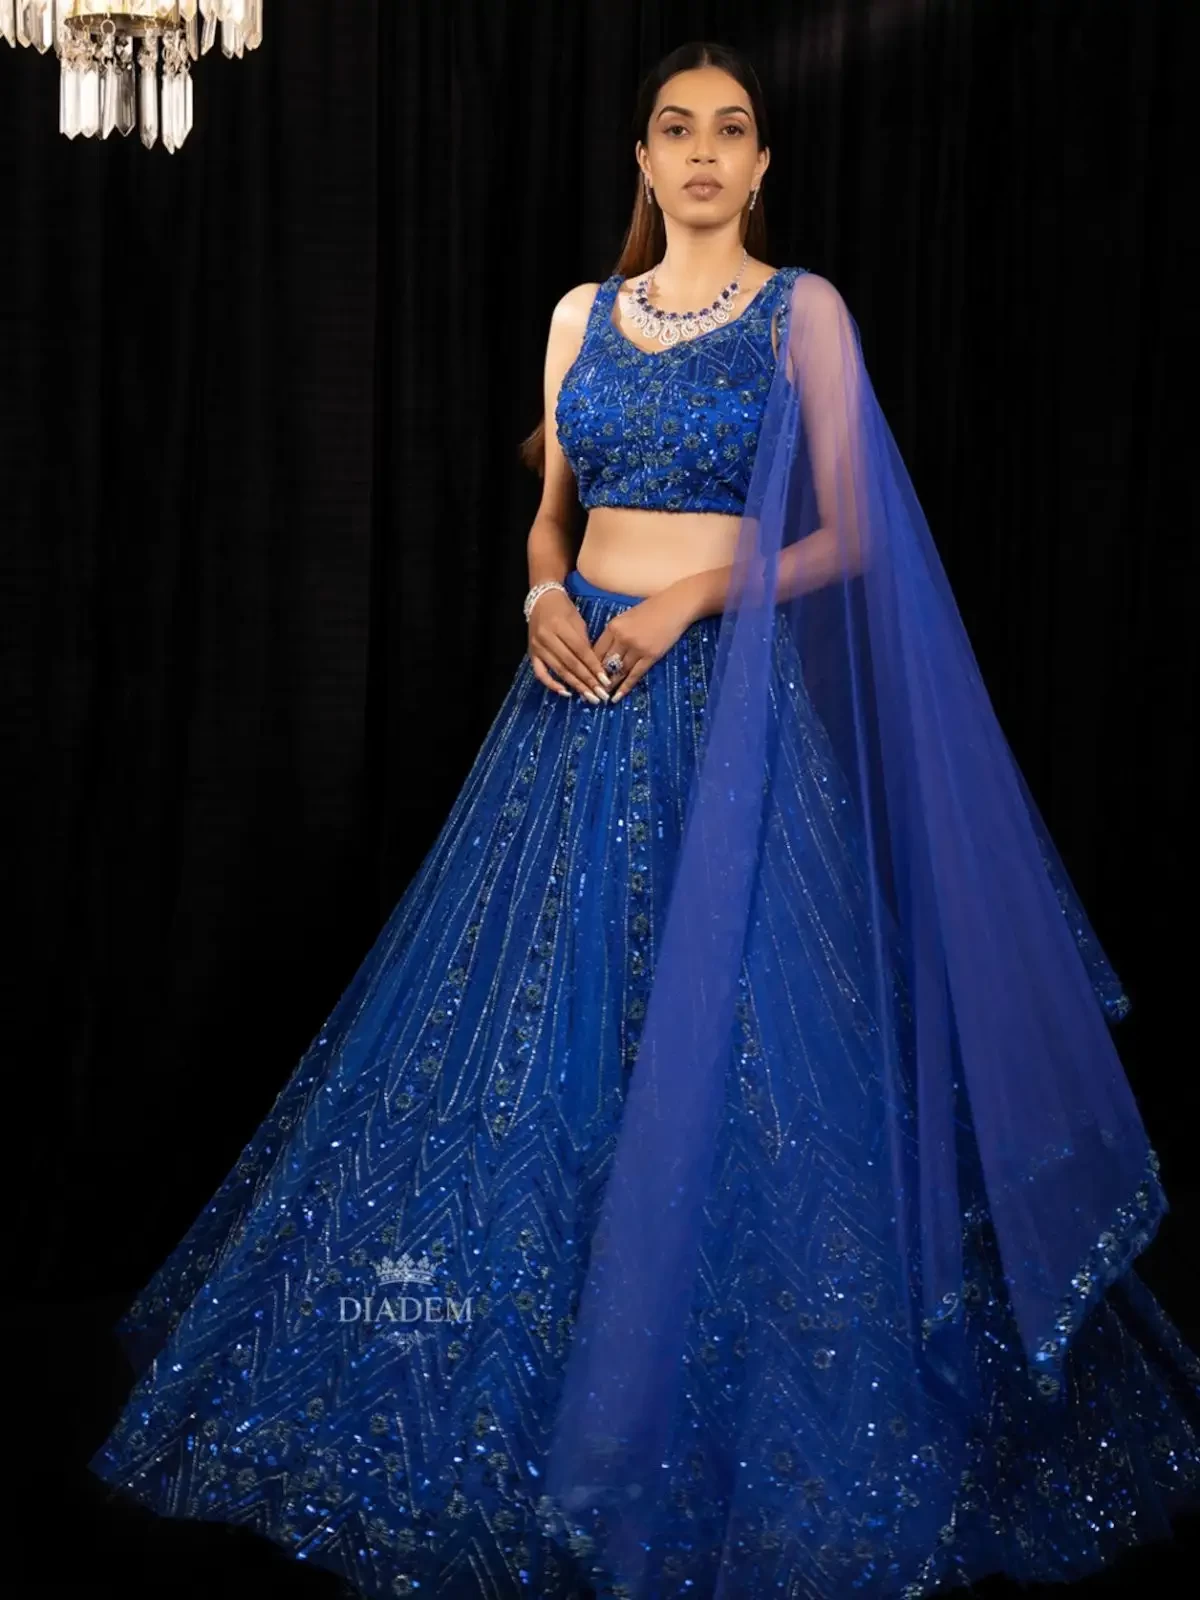 Royal Blue Lehenga Adorned In Floral Sequins And Beads With Dupatta